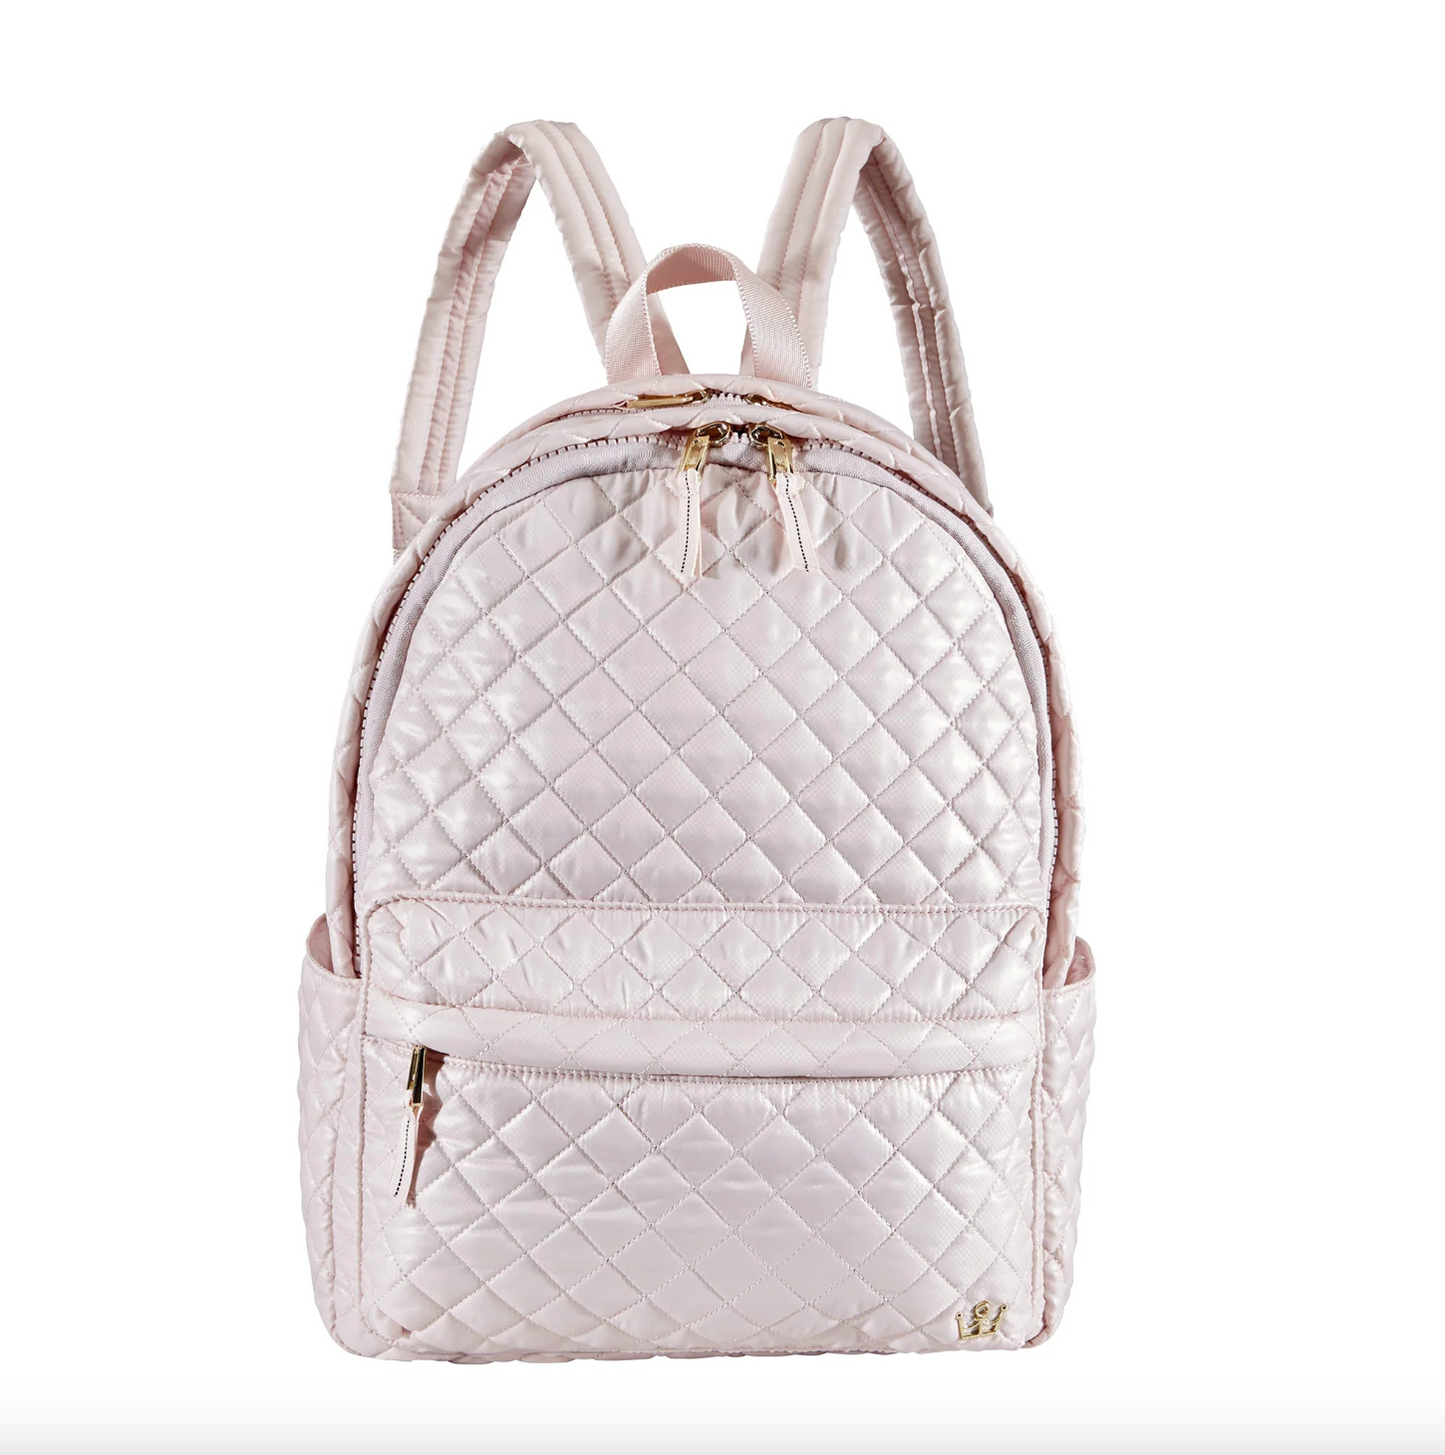 Oliver Thomas Wingwoman Laptop Backpack Backpacks in Petal Pink at Wrapsody